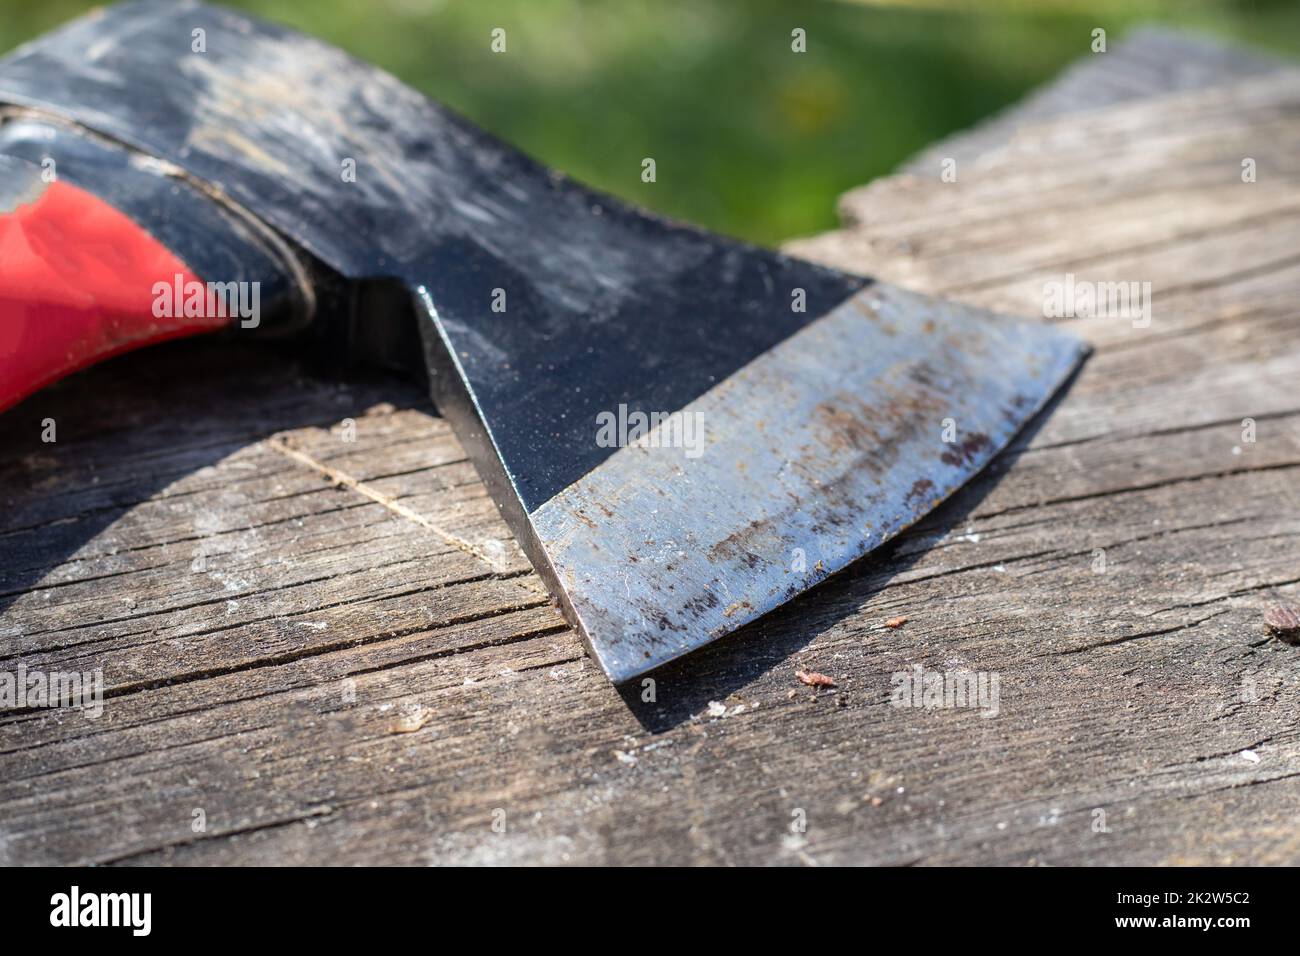 A sharp ax with an ergonomic rubberized handle on a wooden background. The ax is intended for rough, rough processing of wood. Has a forged heat treated carbon steel wedge. Stock Photo